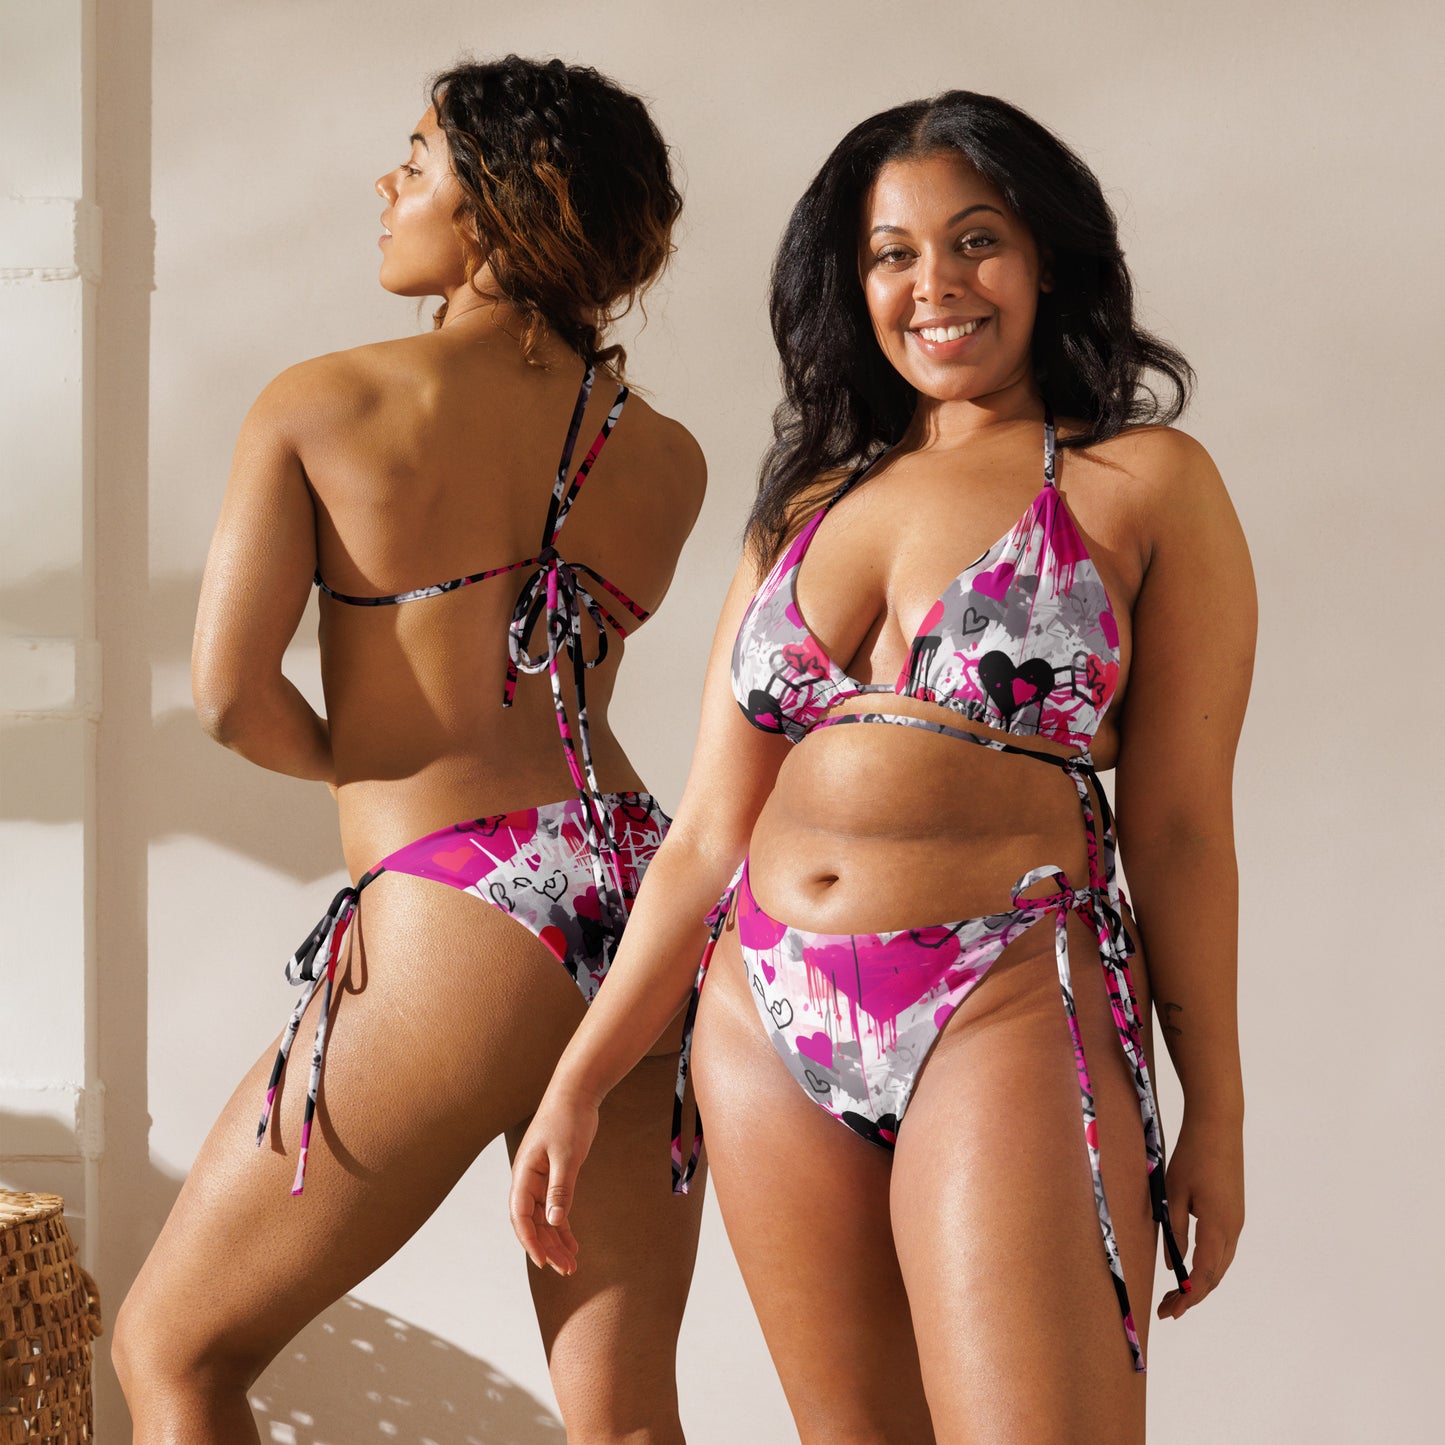 "Pink Love" Bikini by MeaKulpa, where vibrant pink meets timeless elegance. This eye-catching swimwear is designed to make you feel confident and stylish under the sun. Our alternate text captures the essence of two friends enjoying a day at the beach, both adorned in the "Pink Love" Bikini, radiating joy and embracing the carefree spirit of summer. Elevate your swimwear collection with this statement piece that embodies the MeaKulpa ethos.